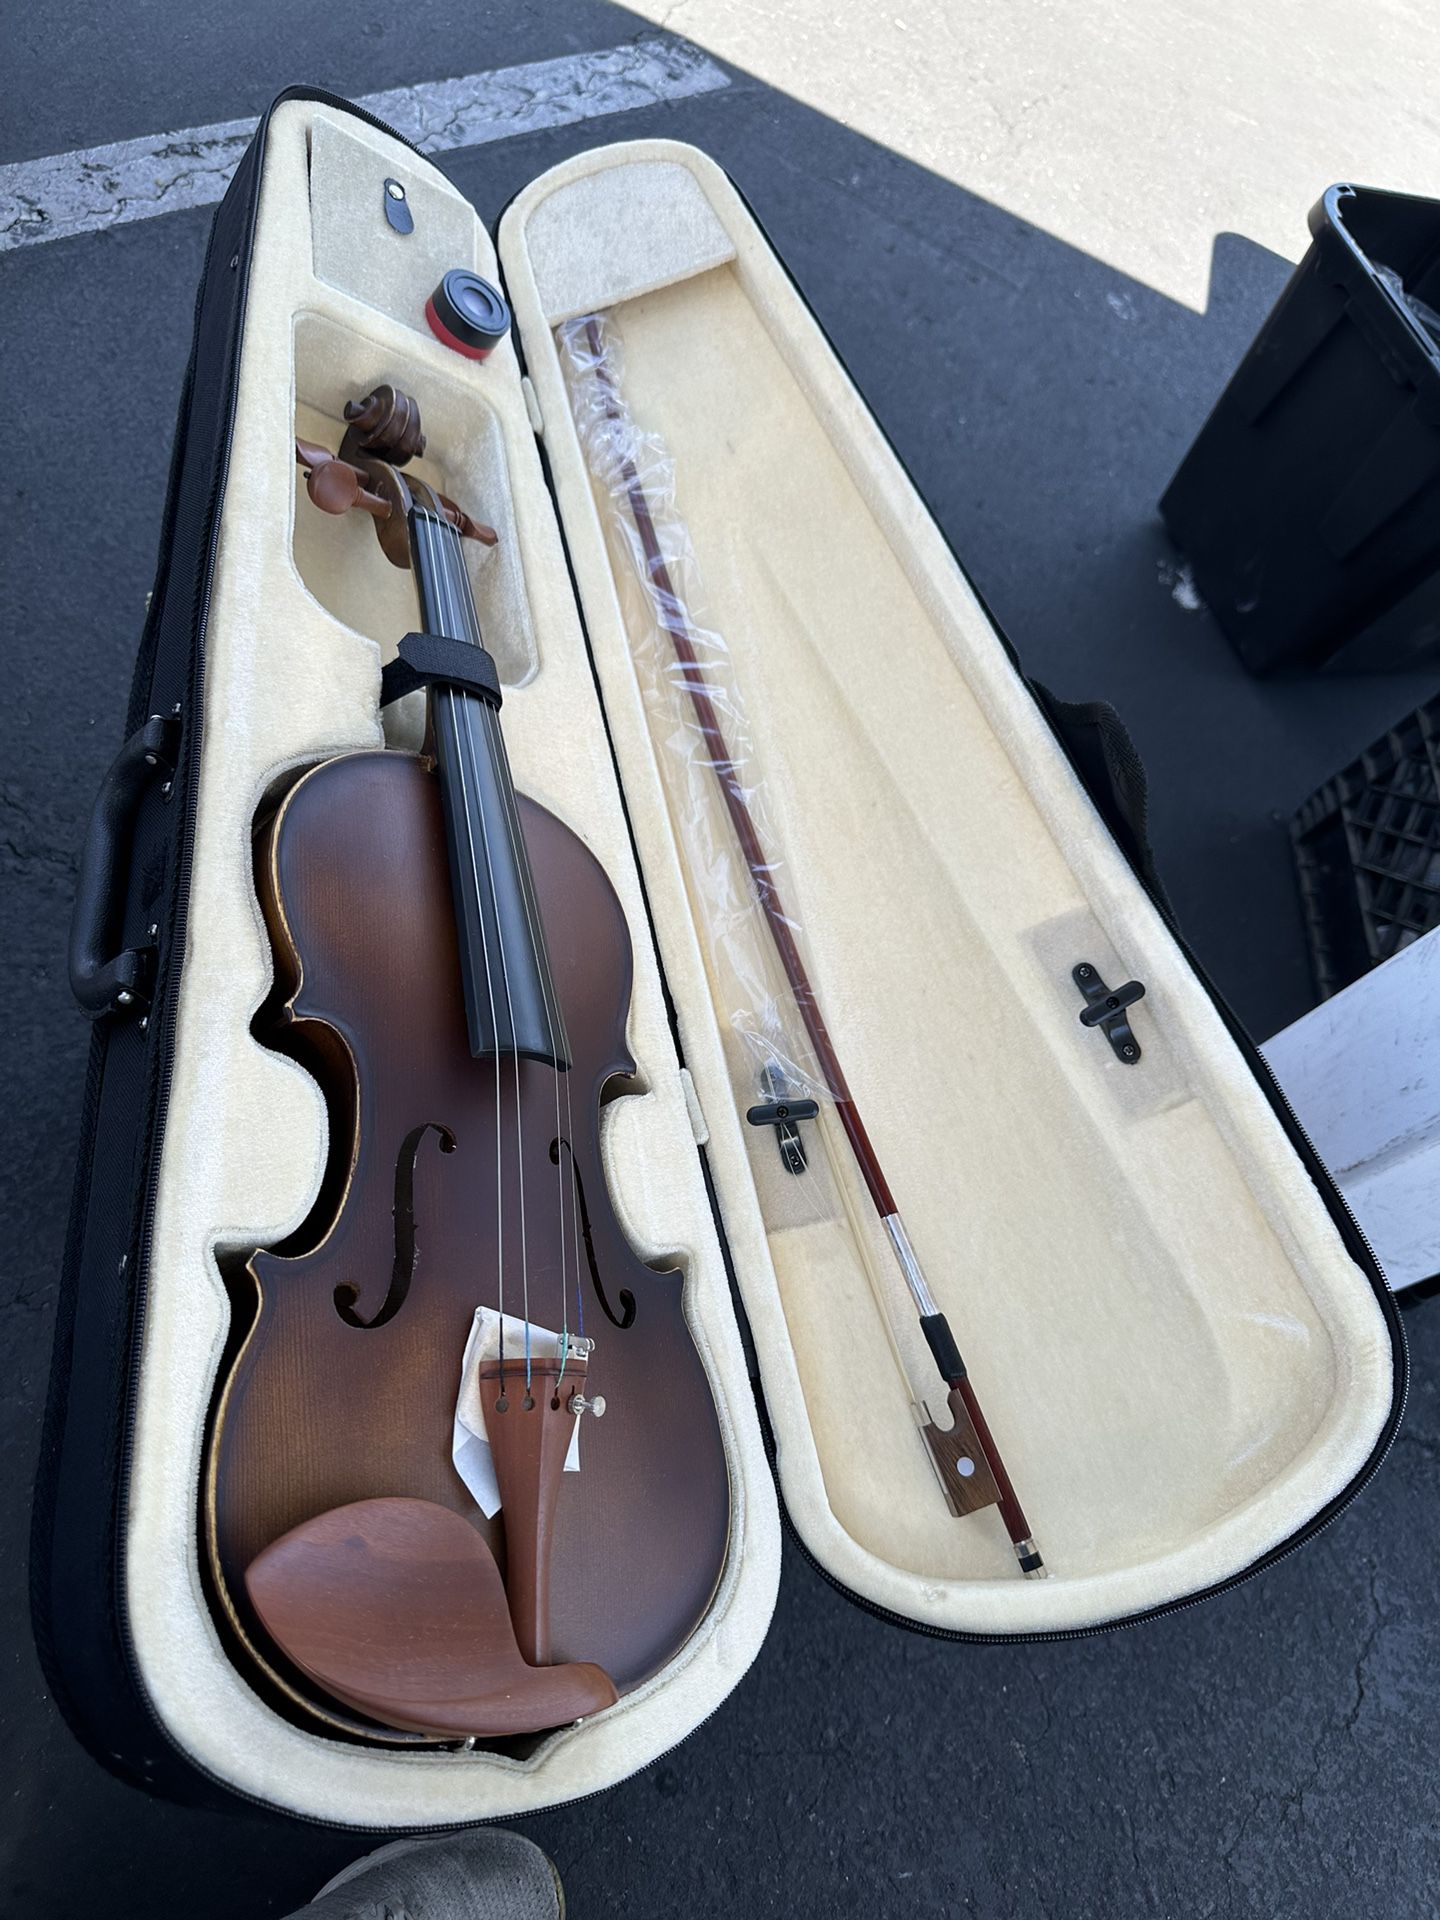 New Violin With Case